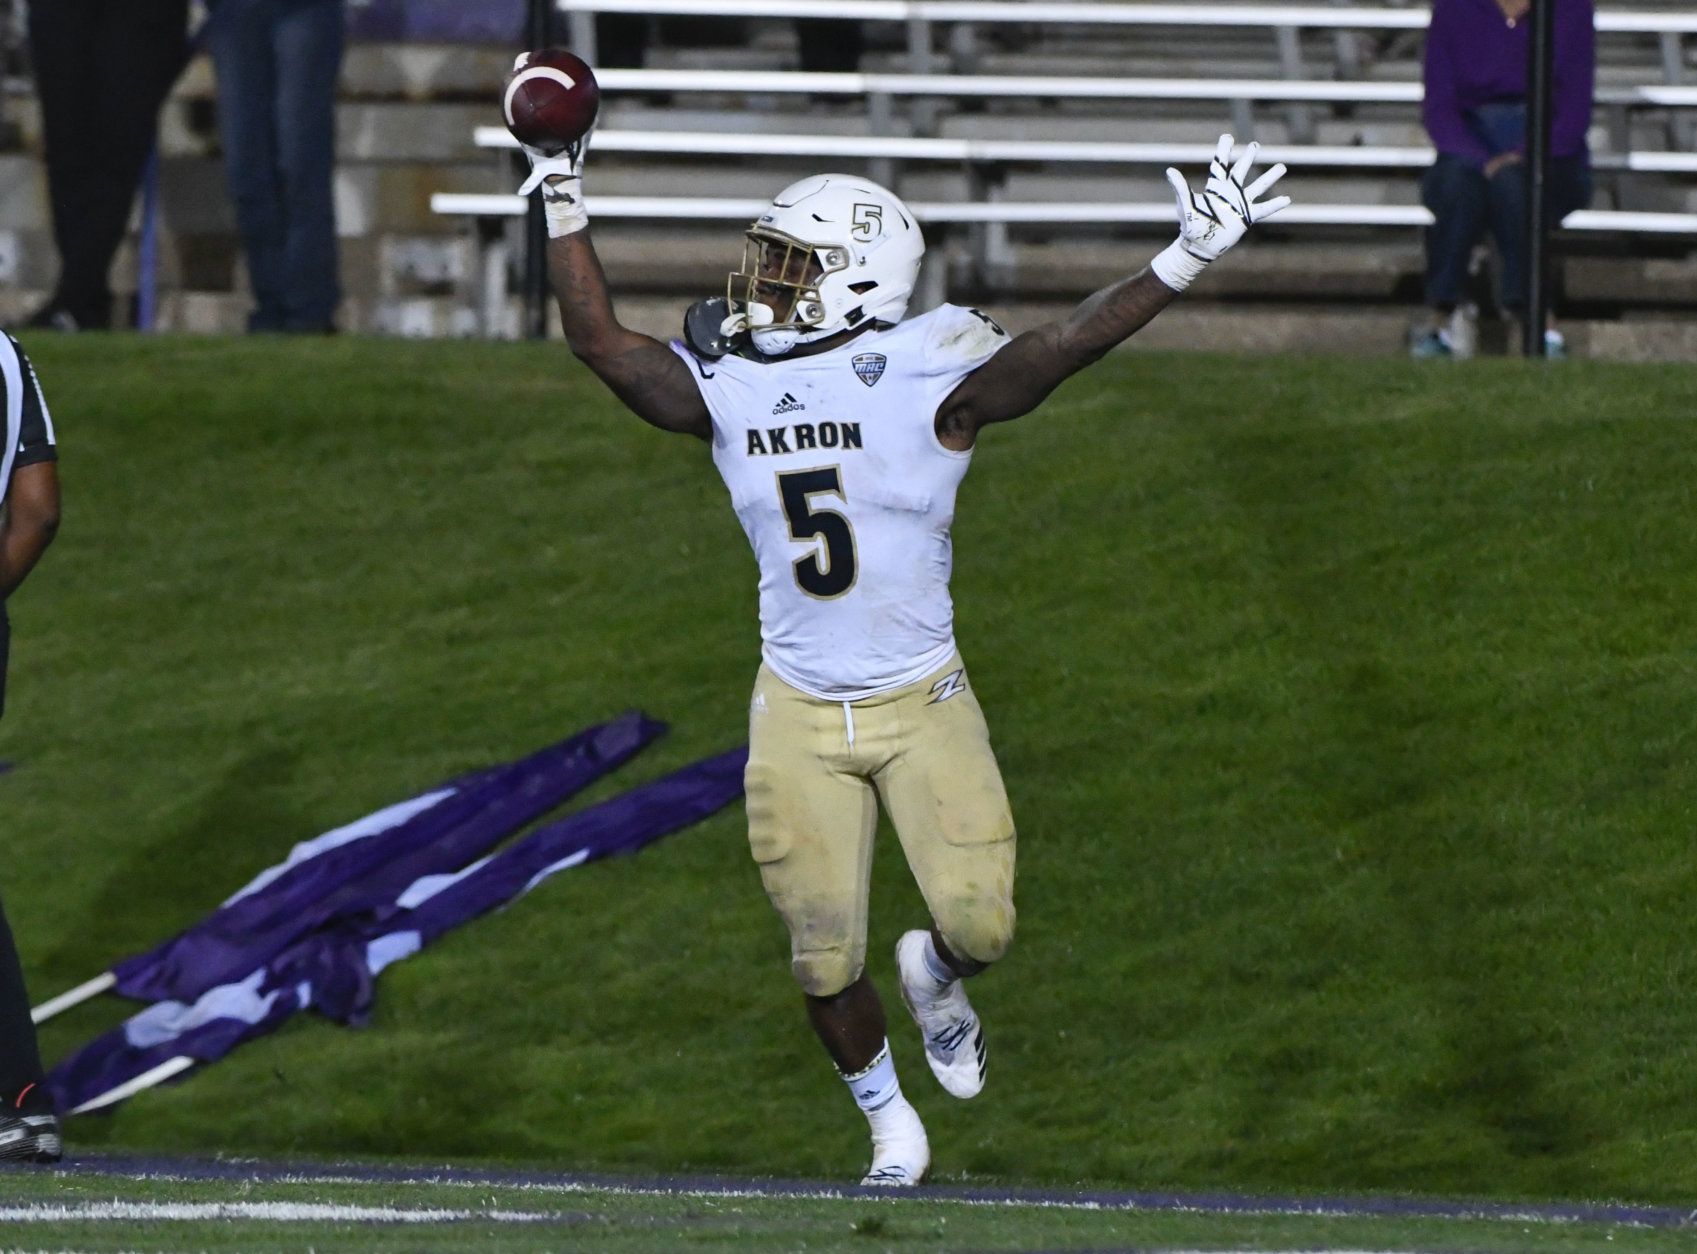 Akron linebacker Ulysees Gilbert III (5) celebrates after he picks up a loose ball for a touchdown against Northwestern during the second half of an NCAA college football game in Evanston, Ill., Saturday, Sept. 15, 2018. (AP Photo/Matt Marton)